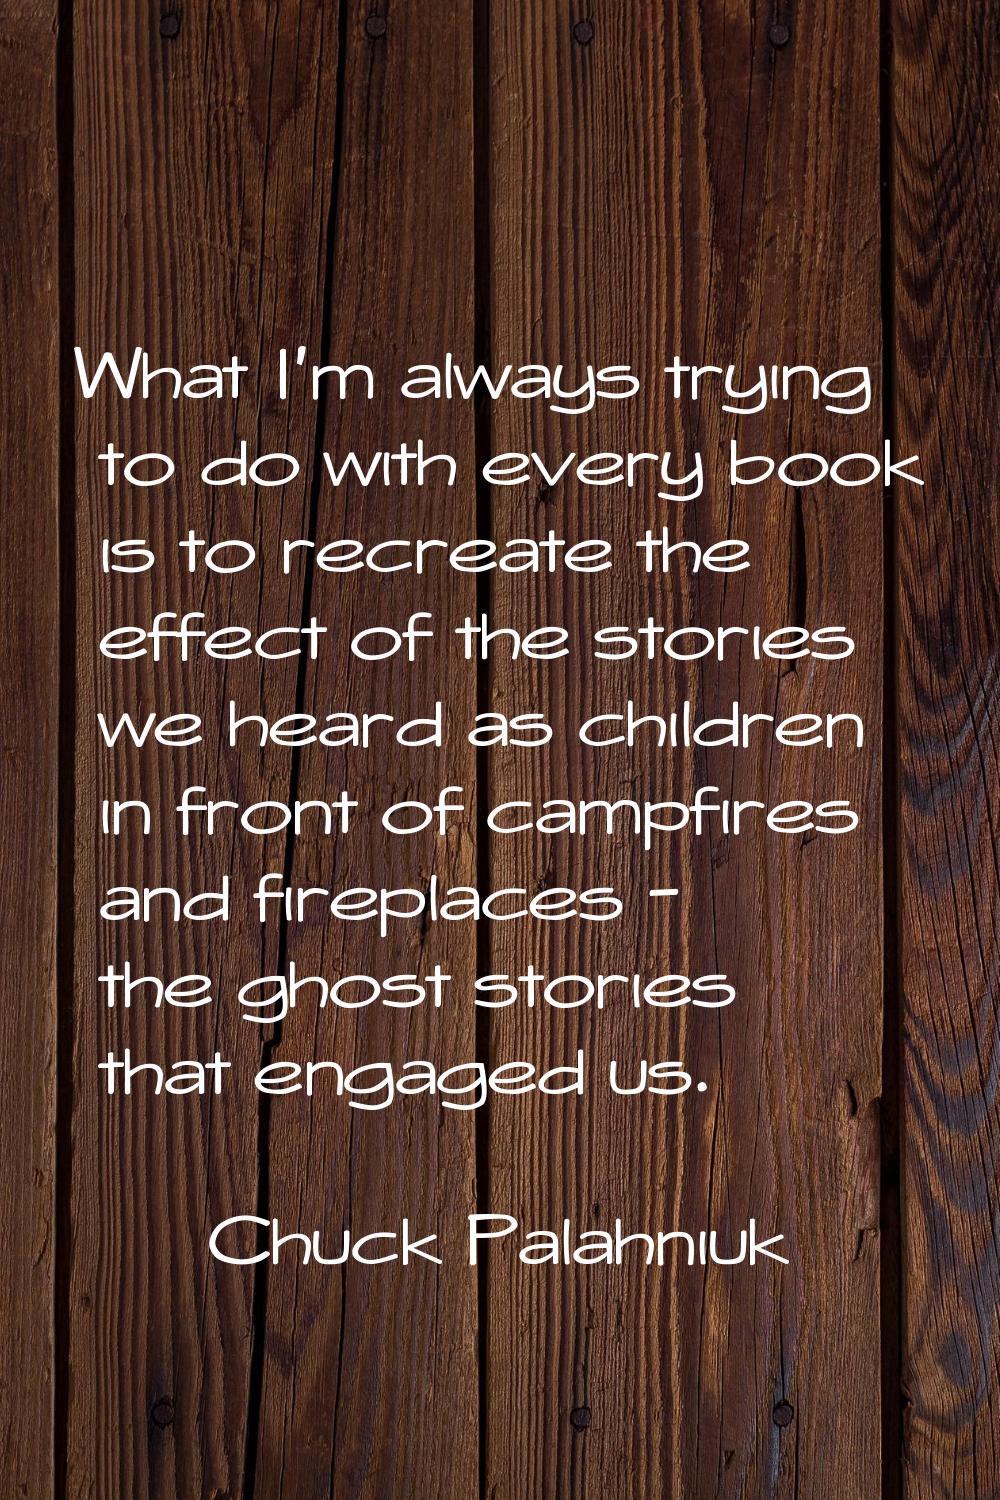 What I'm always trying to do with every book is to recreate the effect of the stories we heard as c